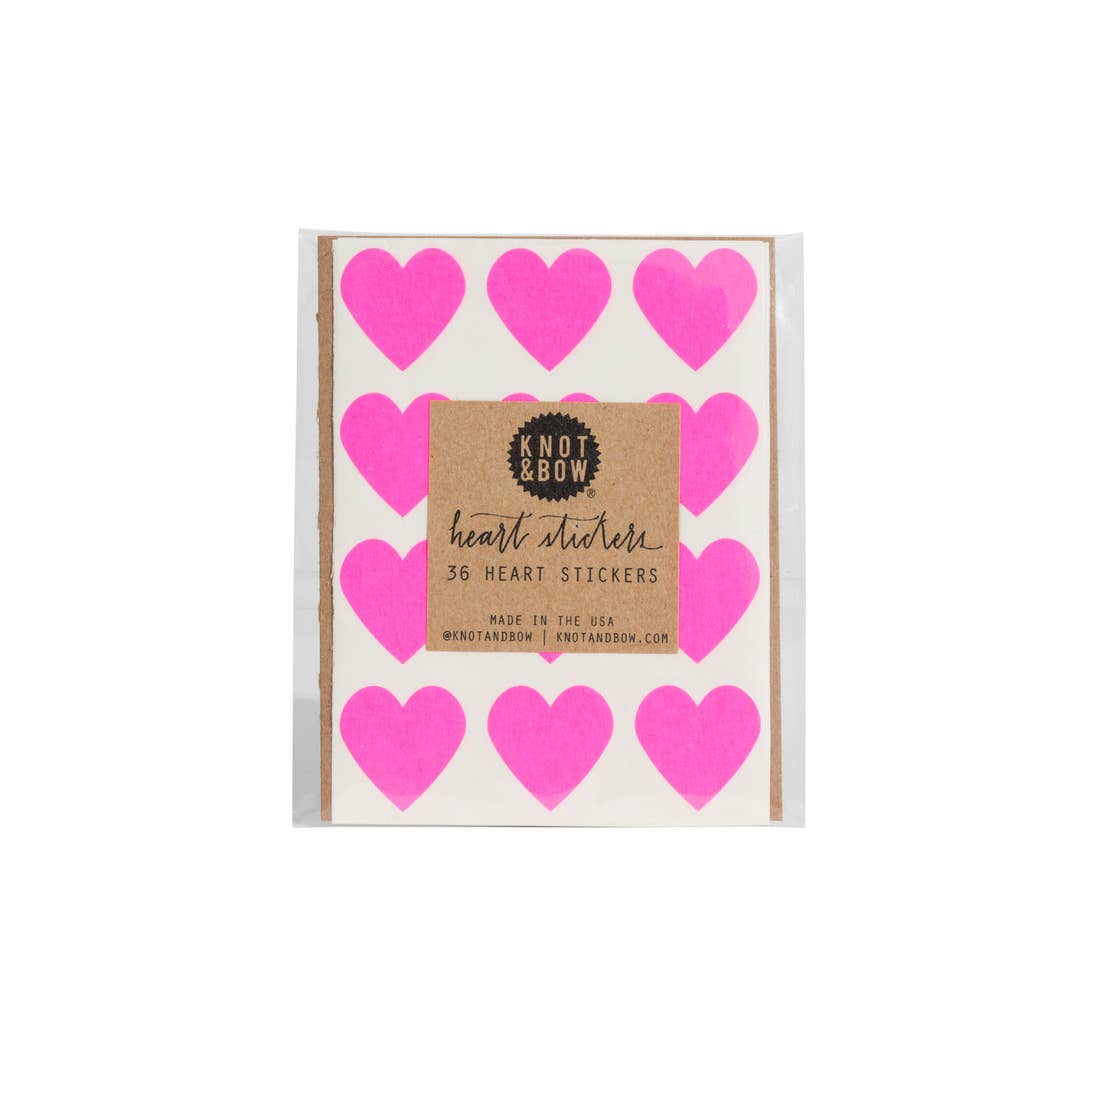 Heart Stickers by Knot & Bow - Neon Pink by Knot & Bow - K. A. Artist Shop